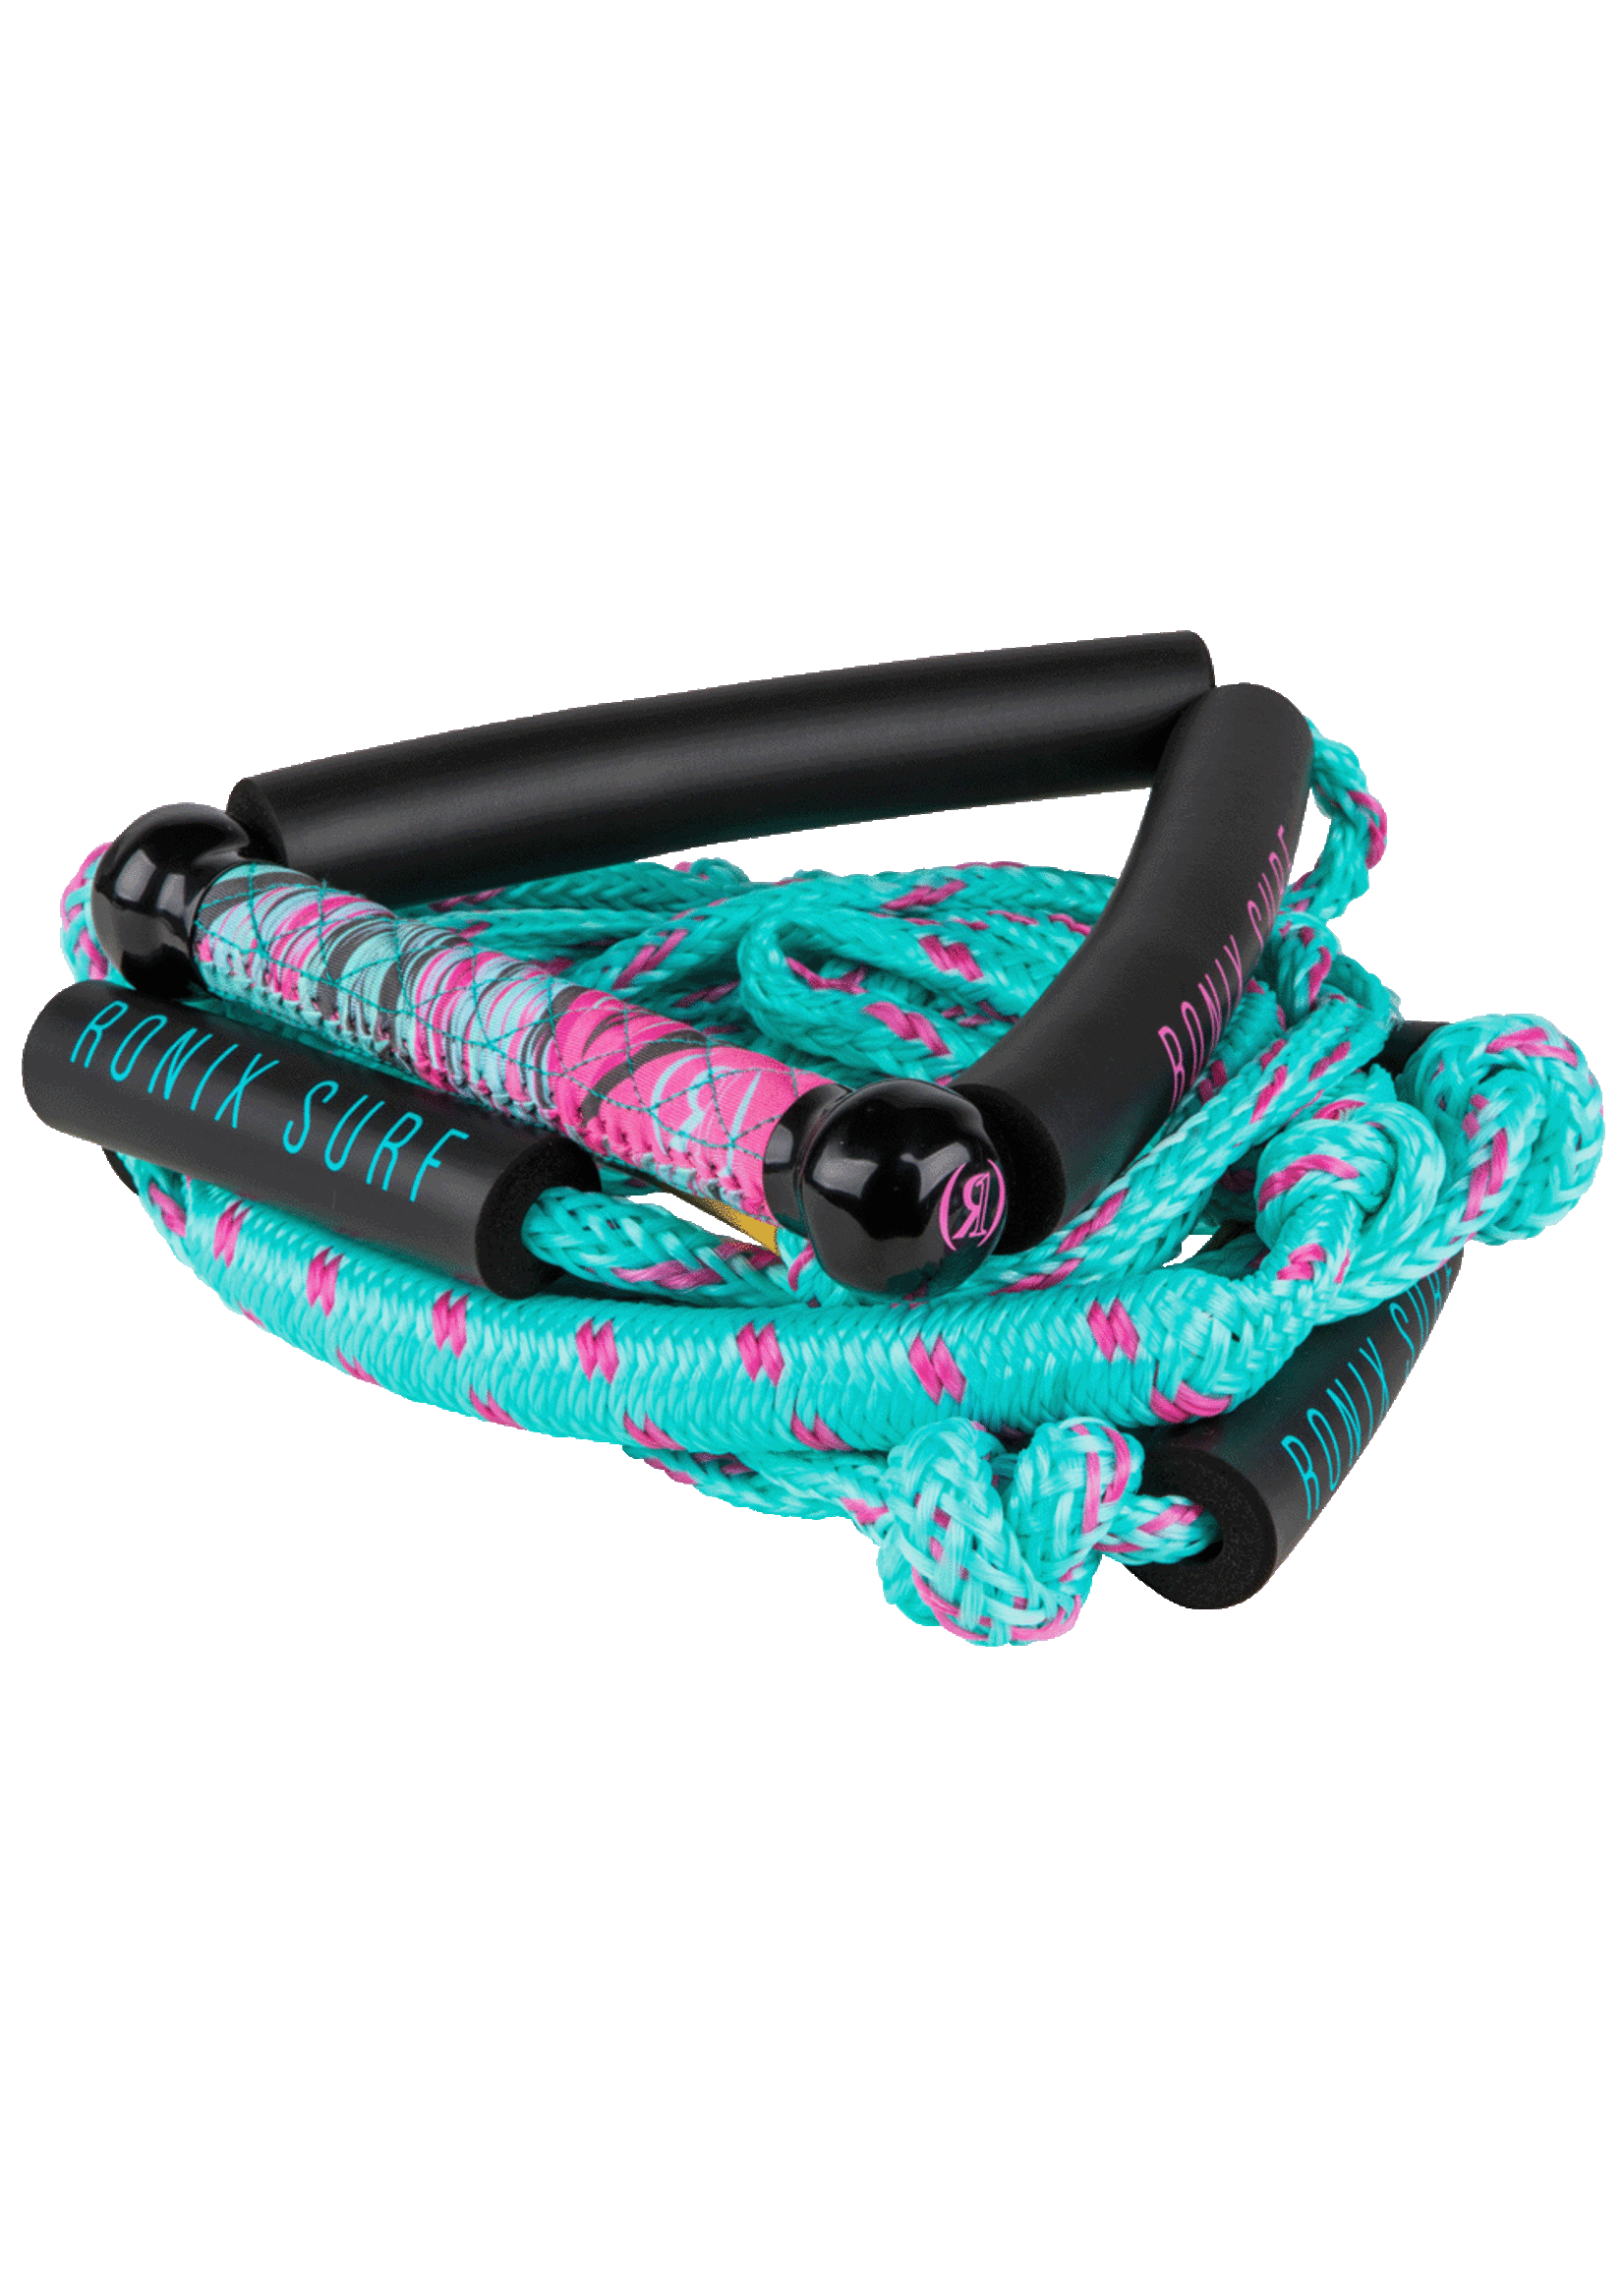 Ronix Ronix Bungee Rope 25ft with handle